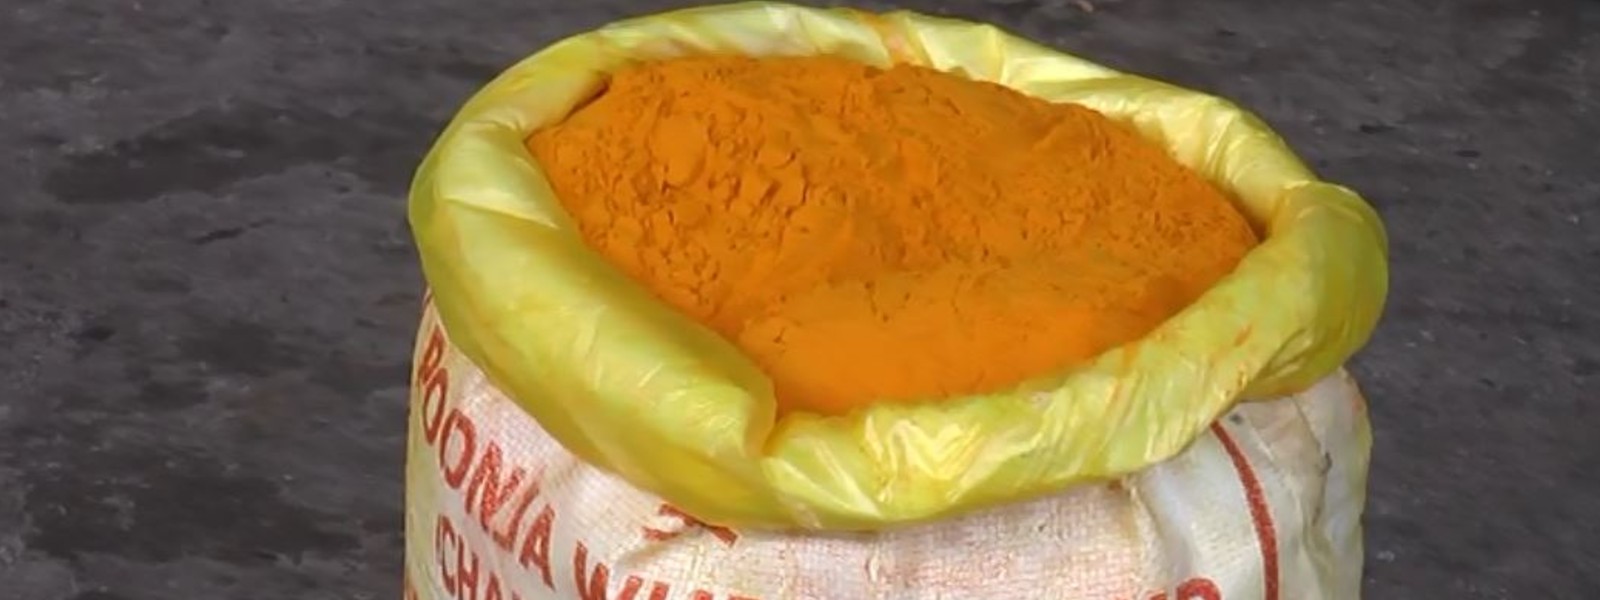 7500 KG OF ILLEGALLY IMPORTED TURMERIC SEIZED